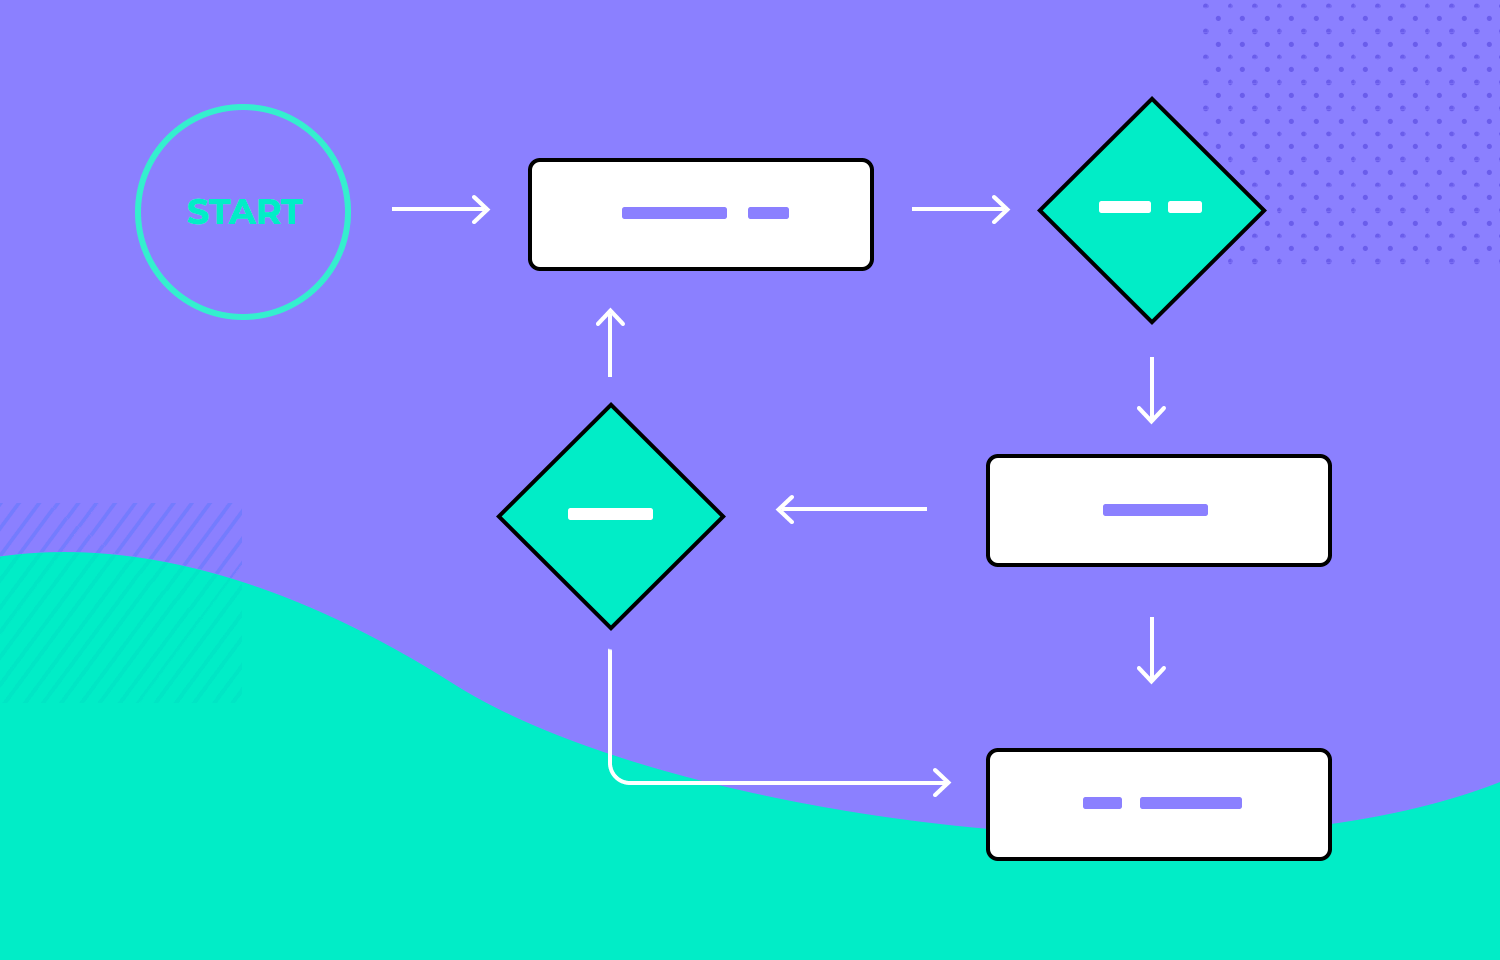 auto-generate a flow chart for osx